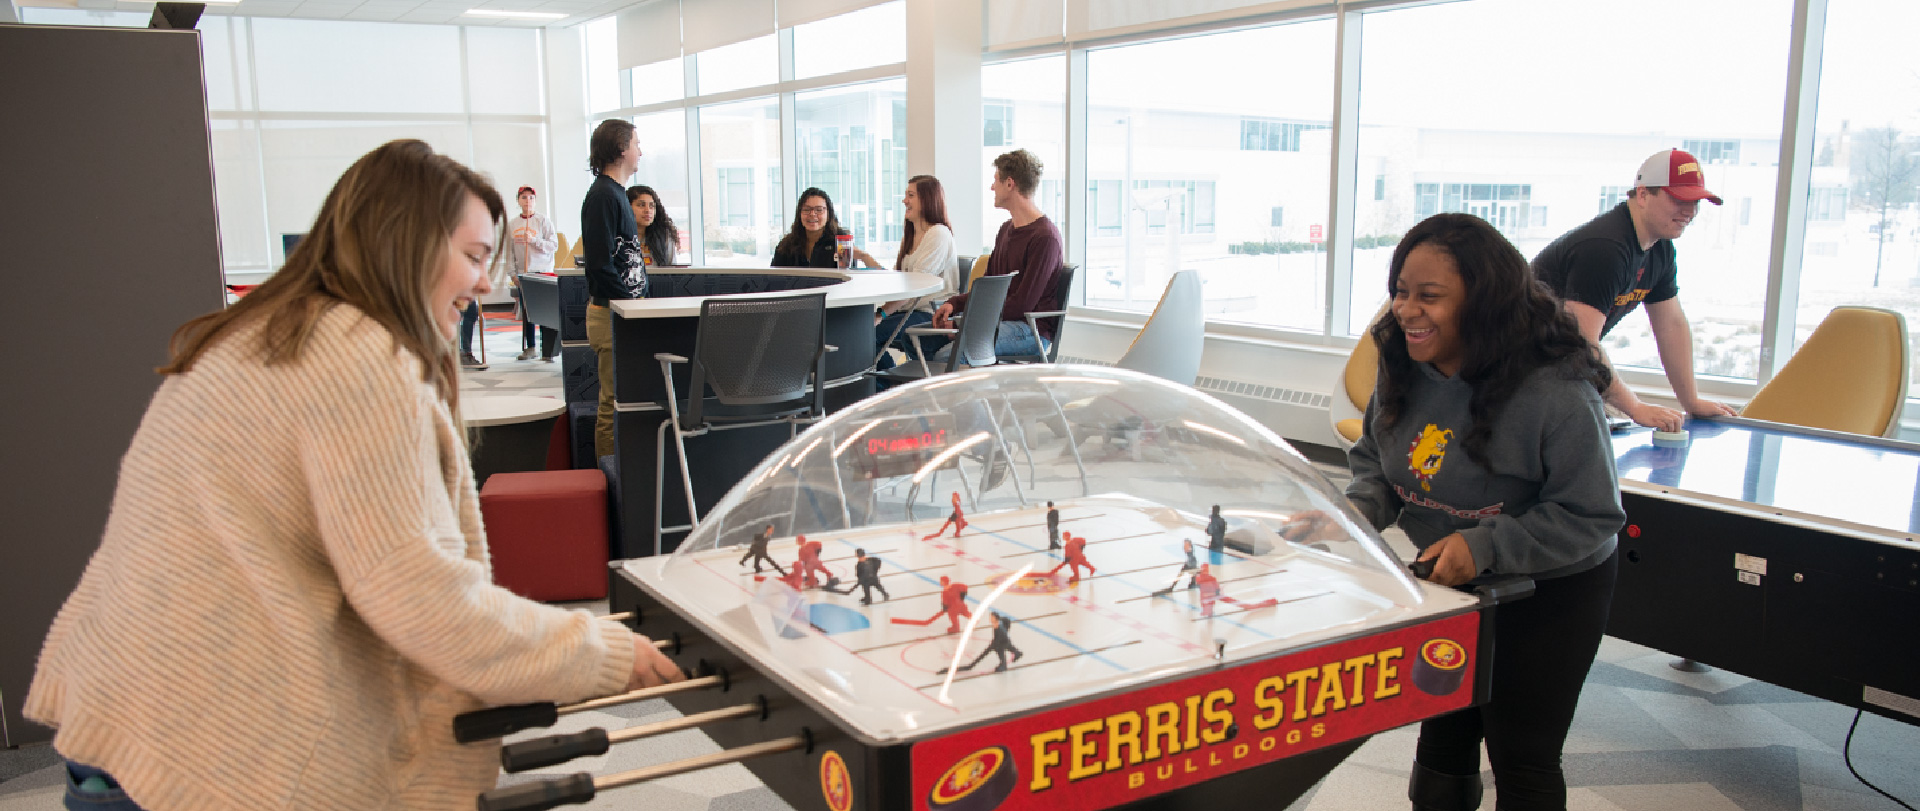 Students playing games, including bubble hockey, pool, and air hockey, in the lobby of North Hall, a residence hall on the campus of Ferris State University in Big Rapids, MI